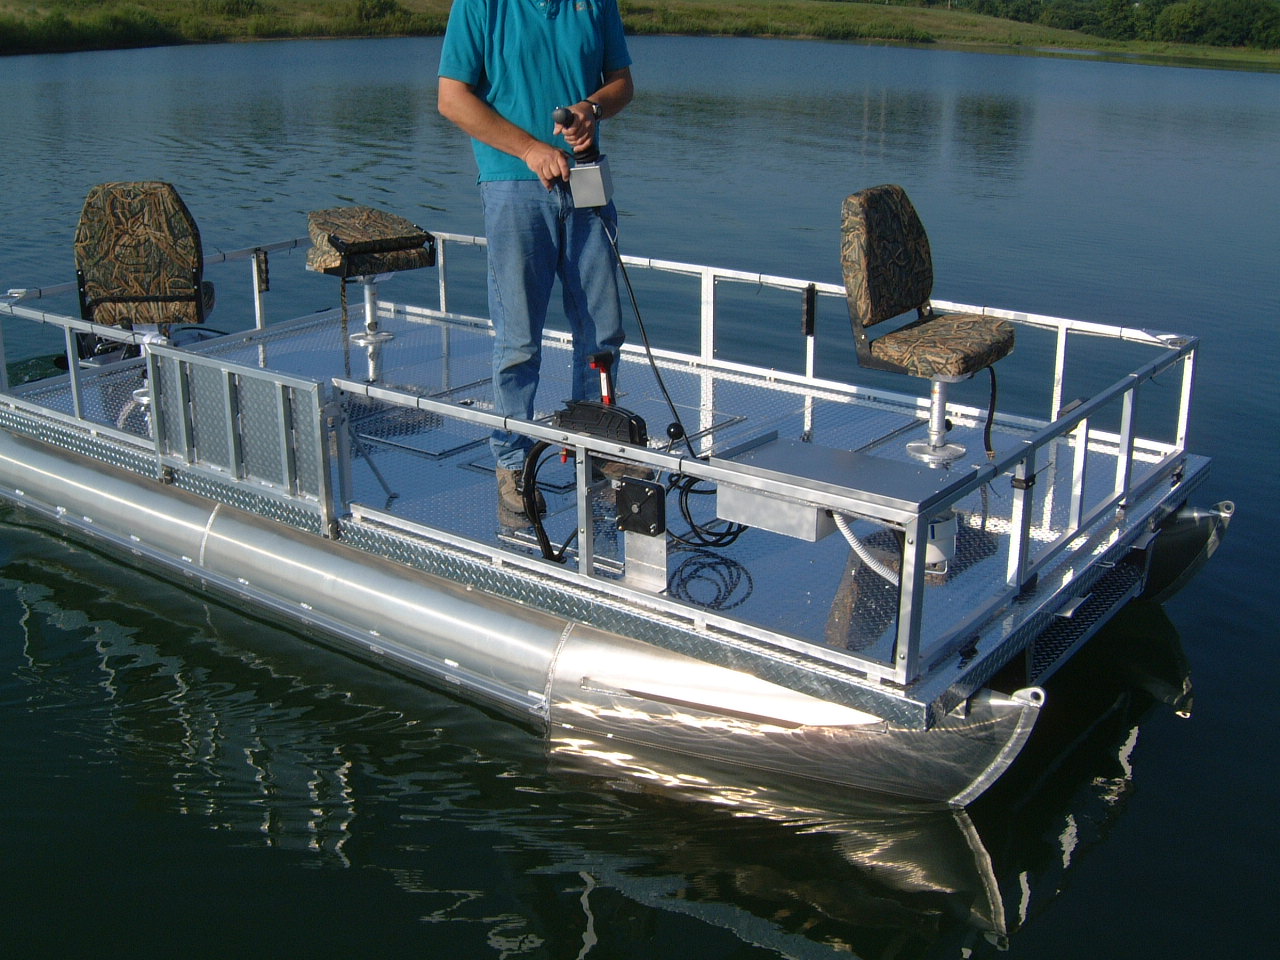 Pontoon Boat Plans Free | How To and DIY Building Plans 